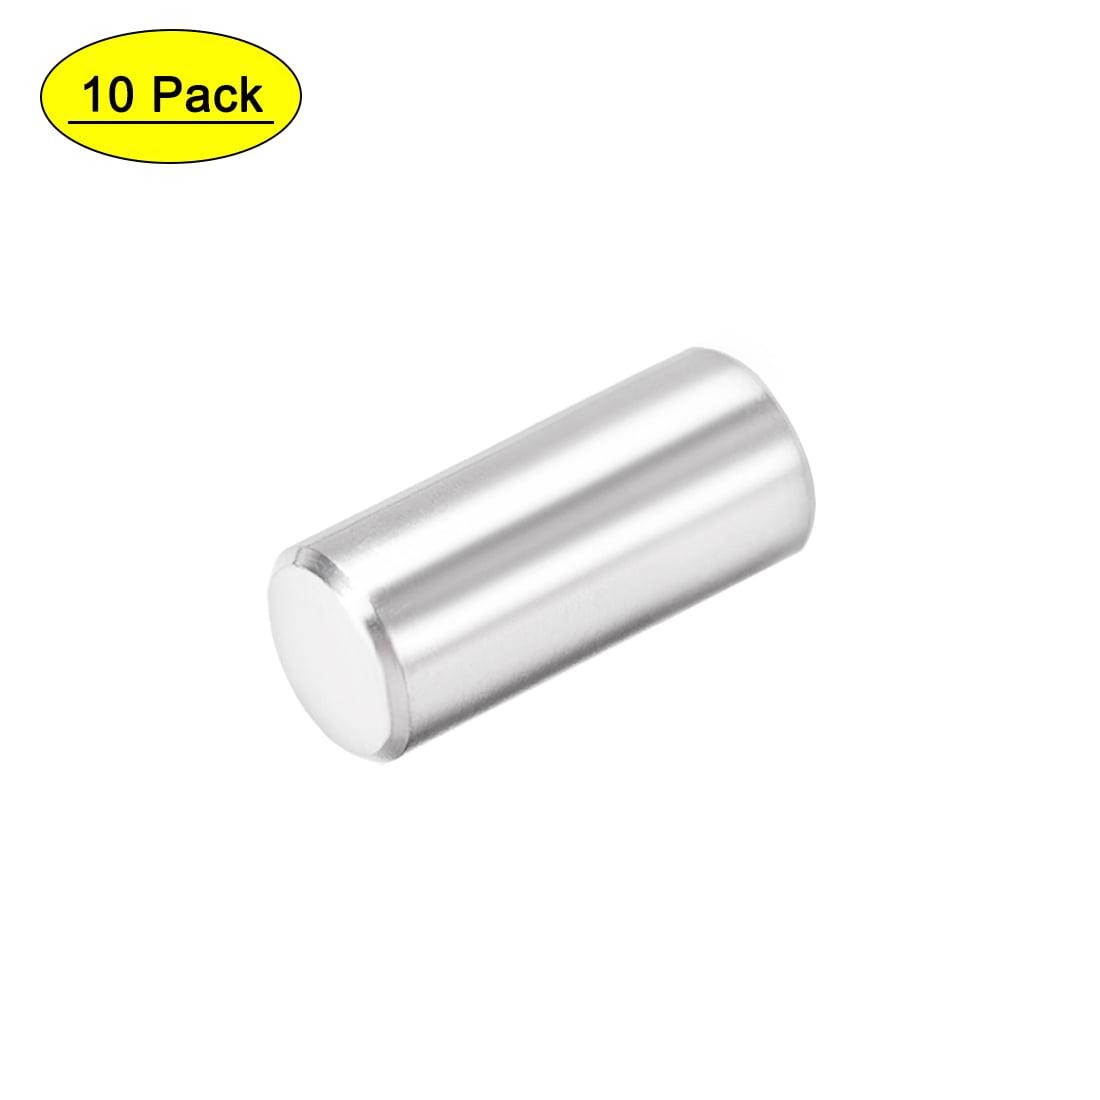 304 Stainless Steel M5 Female Thread 8mm x 35mm Cylindrical Dowel Pin 4pcs